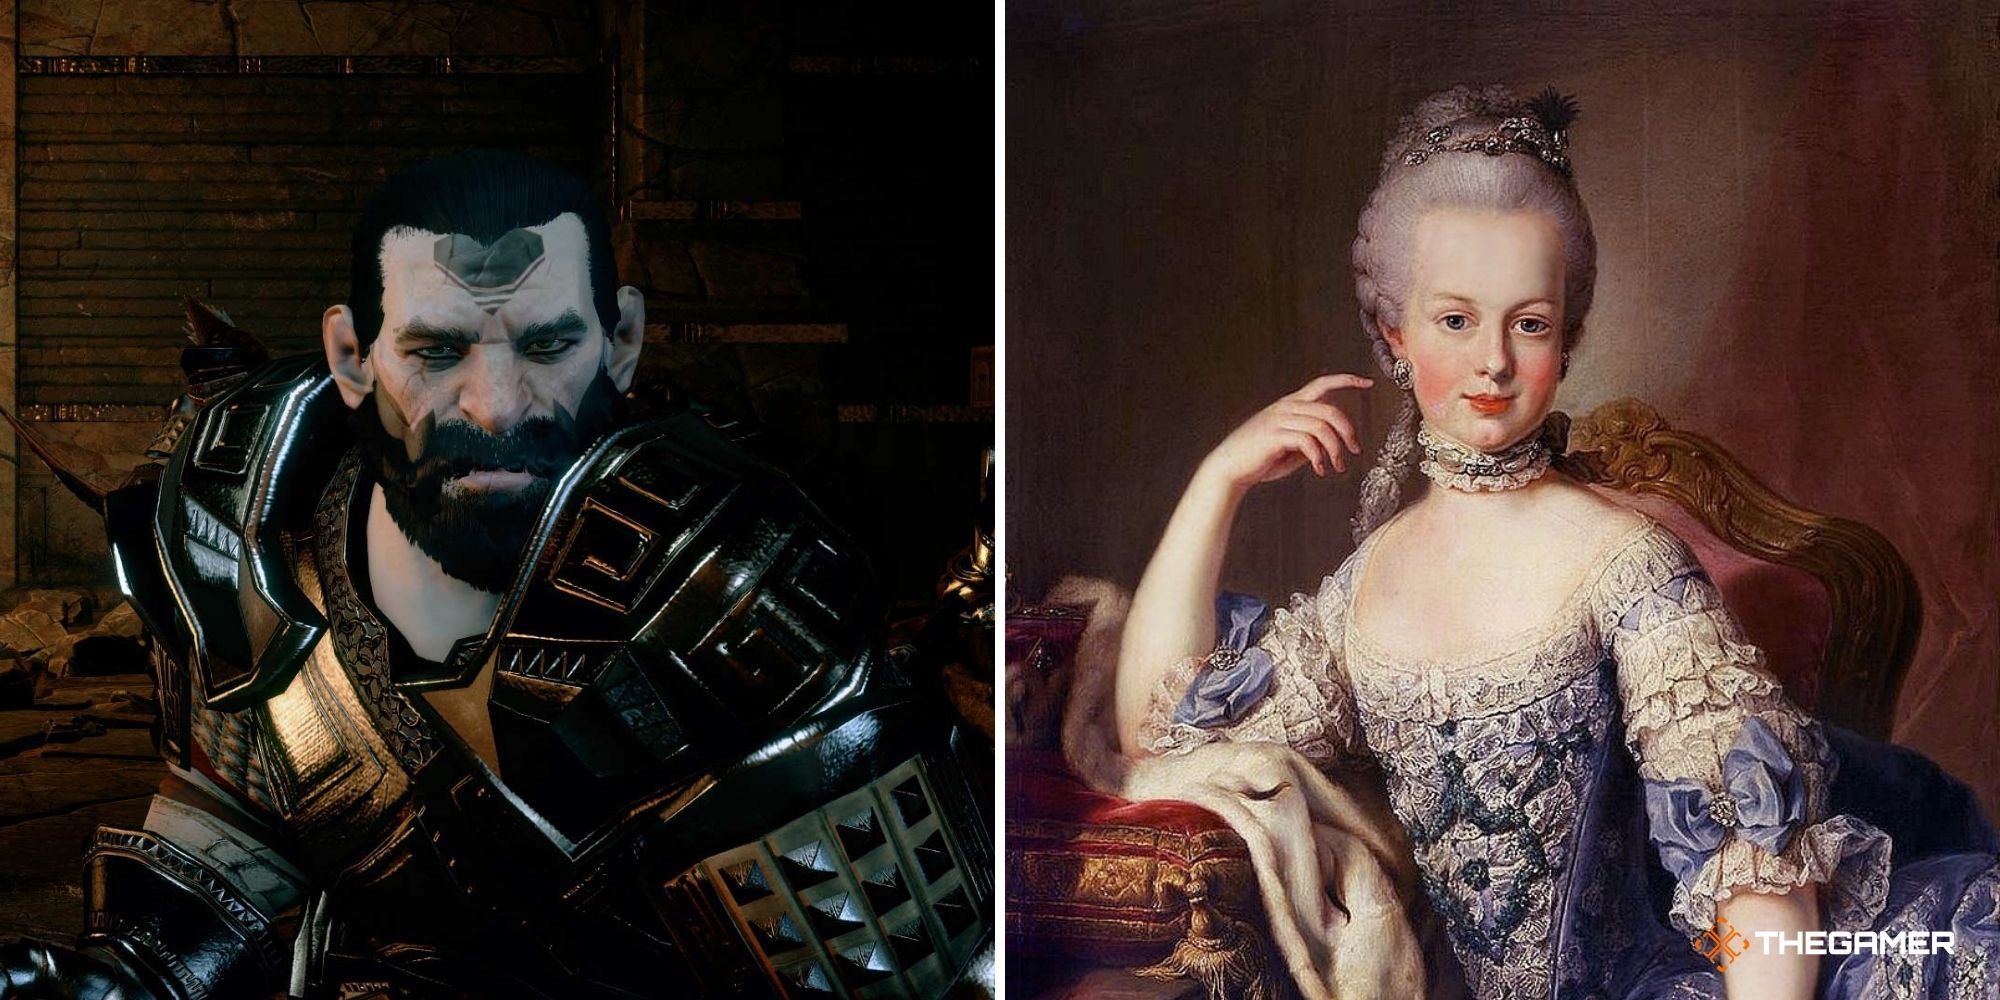 Dwarf from Dragon Age Inquisition The Descent DLC (left), Marie Antoinette painting (right)